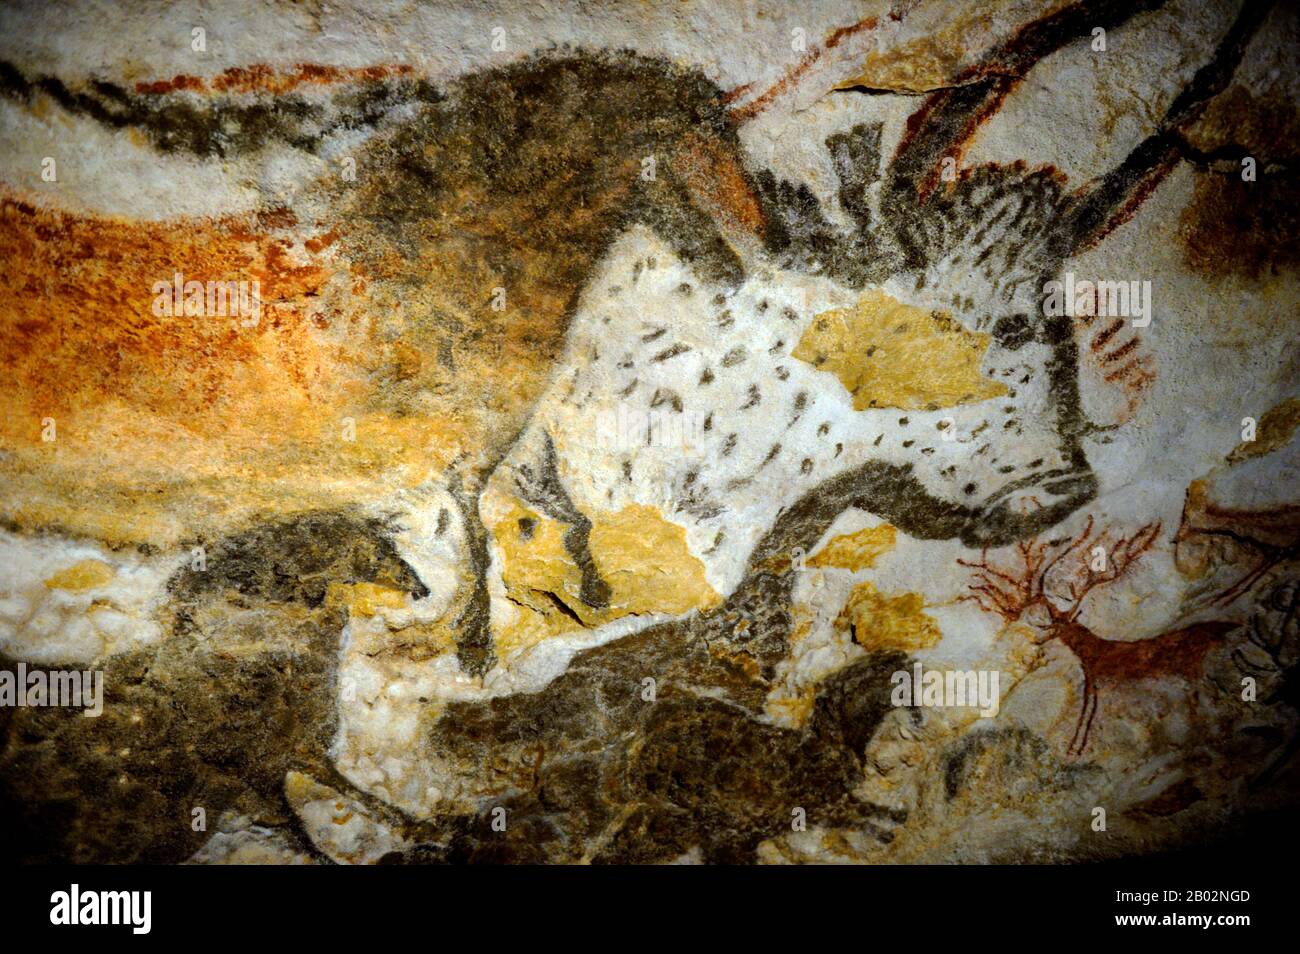 Lascaux is the setting of a complex of caves in southwestern France famous for its Paleolithic cave paintings.  The original caves are located near the village of Montignac, in the department of Dordogne. They contain some of the best-known Upper Paleolithic art. These paintings are estimated to be 17,300 years old. They primarily consist of images of large animals, most of which are known from fossil evidence to have lived in the area at the time.  In 1979, Lascaux was added to the UNESCO World Heritage Sites list along with other prehistoric sites in the Vézère valley. Stock Photo